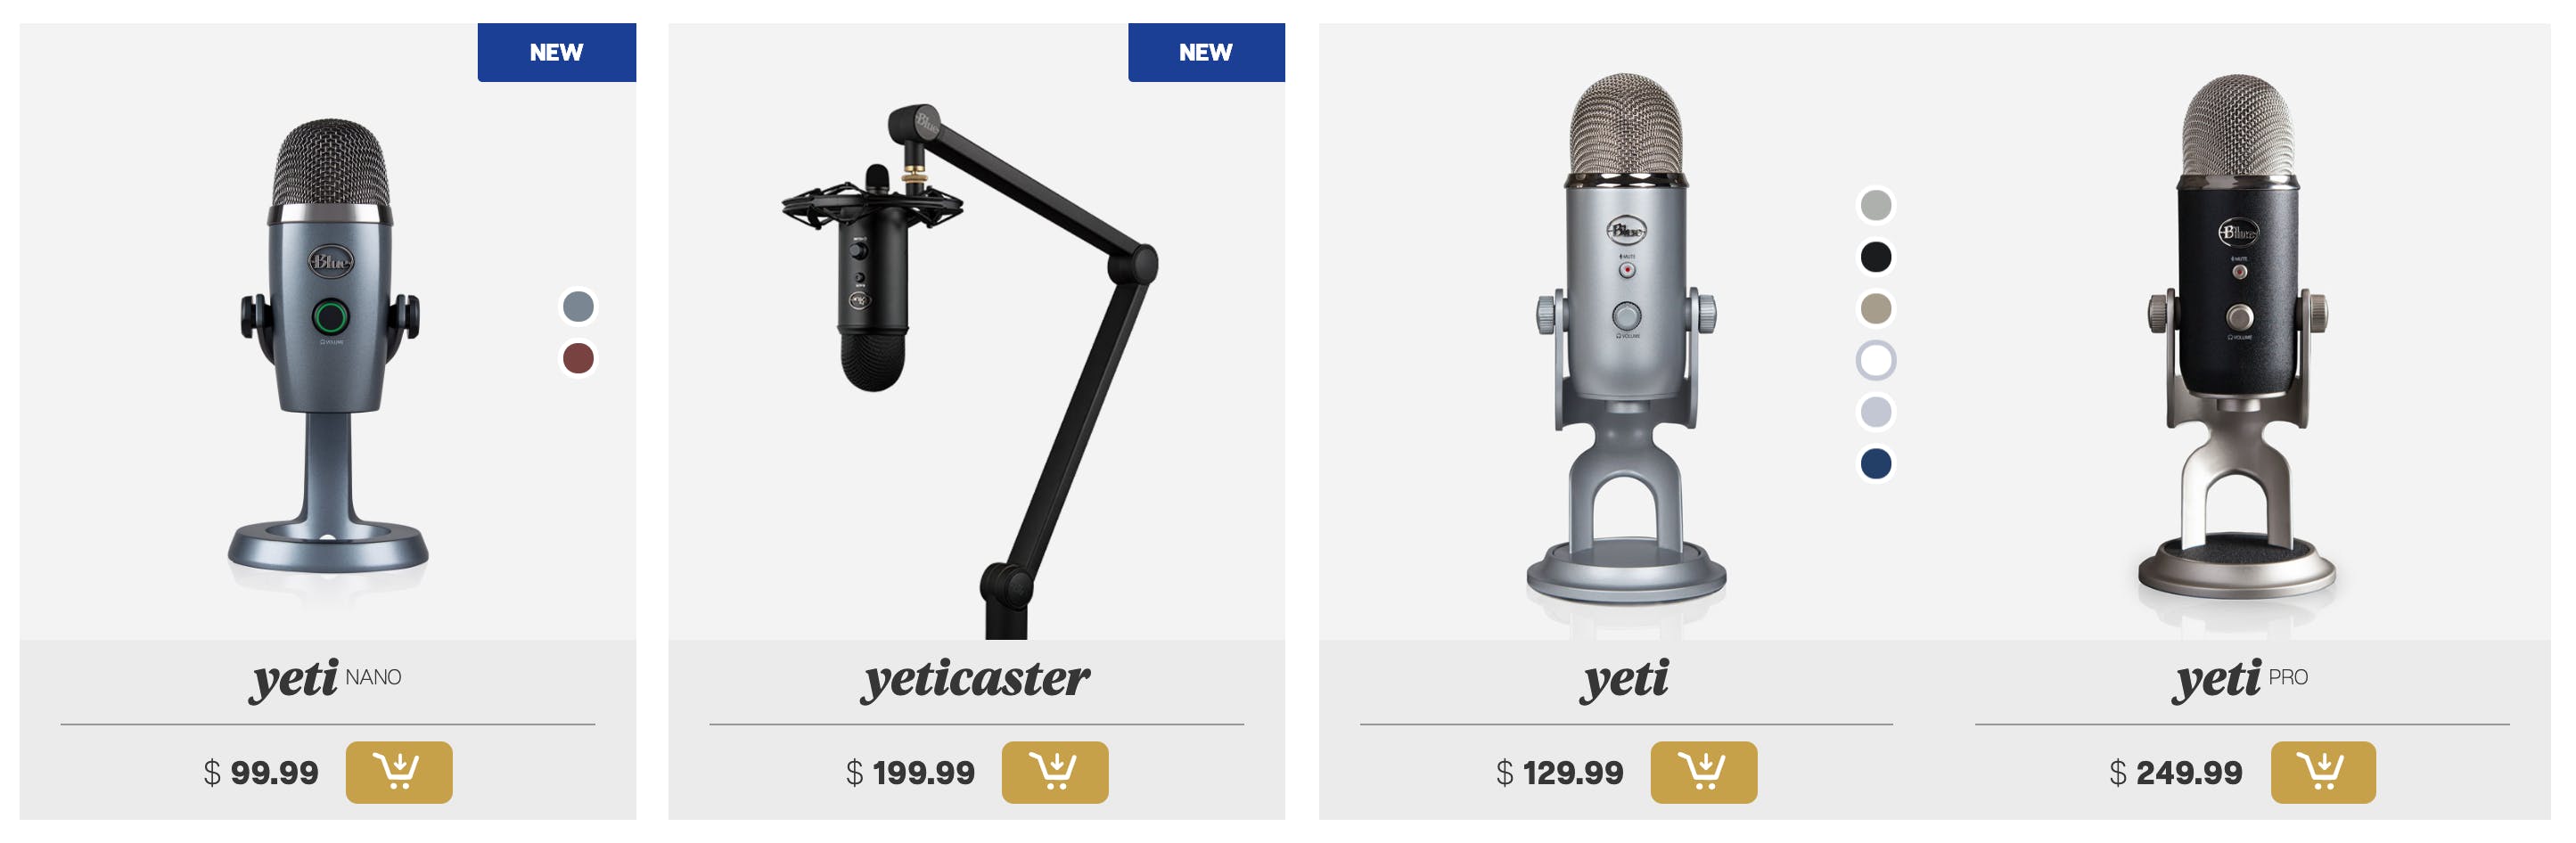 A few of Blue's microphones from their website - all of which have the same design challenge